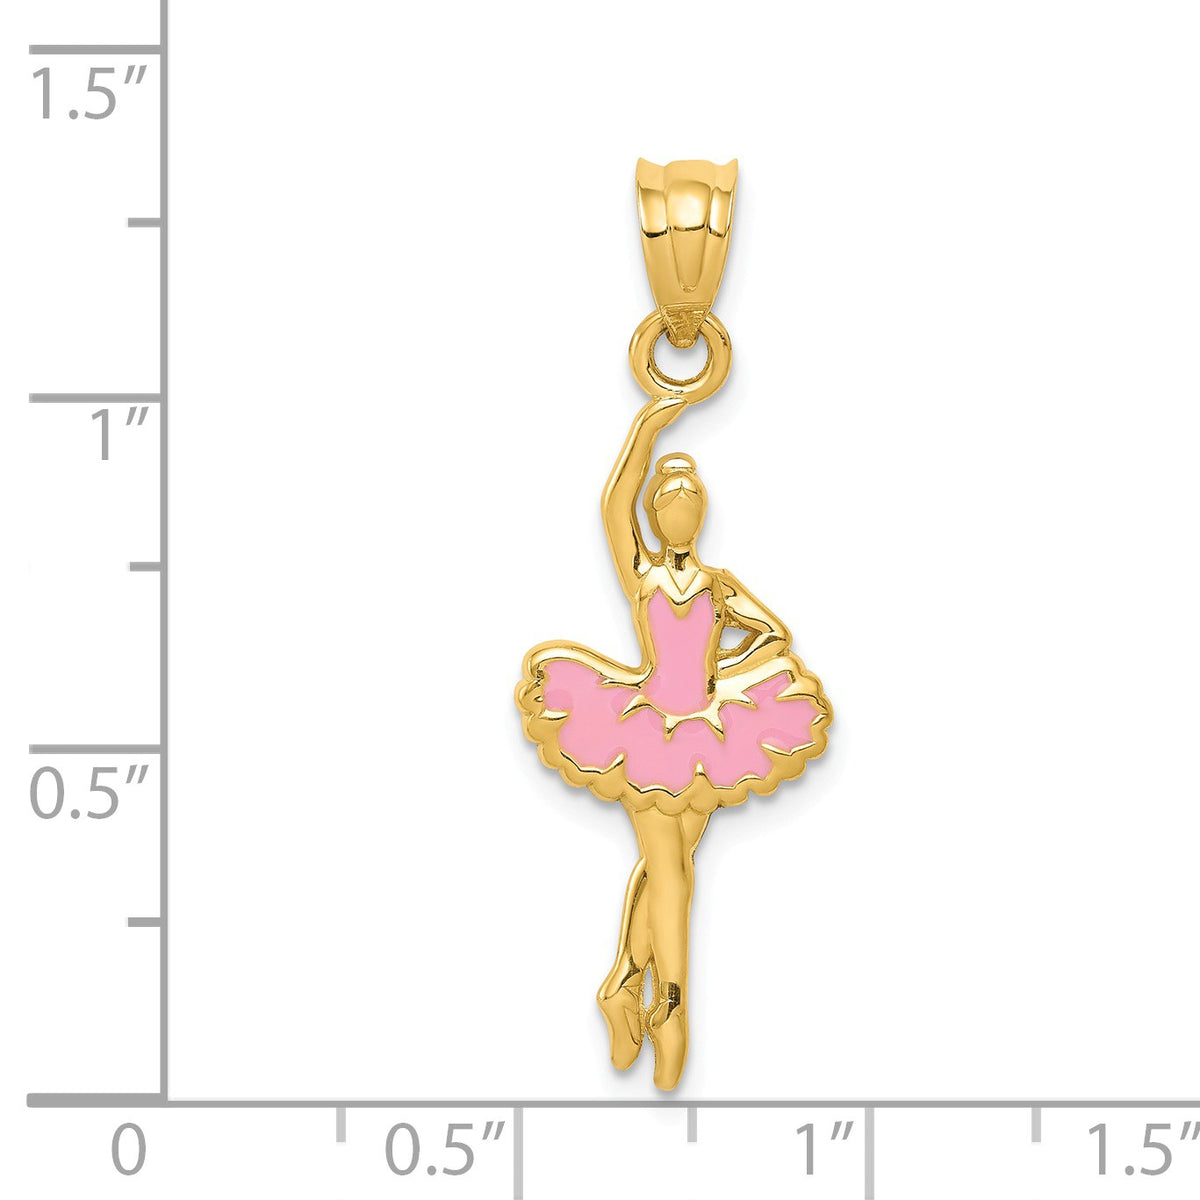 Alternate view of the 14k Yellow Gold 2D Pink Enameled Ballerina Pendant by The Black Bow Jewelry Co.